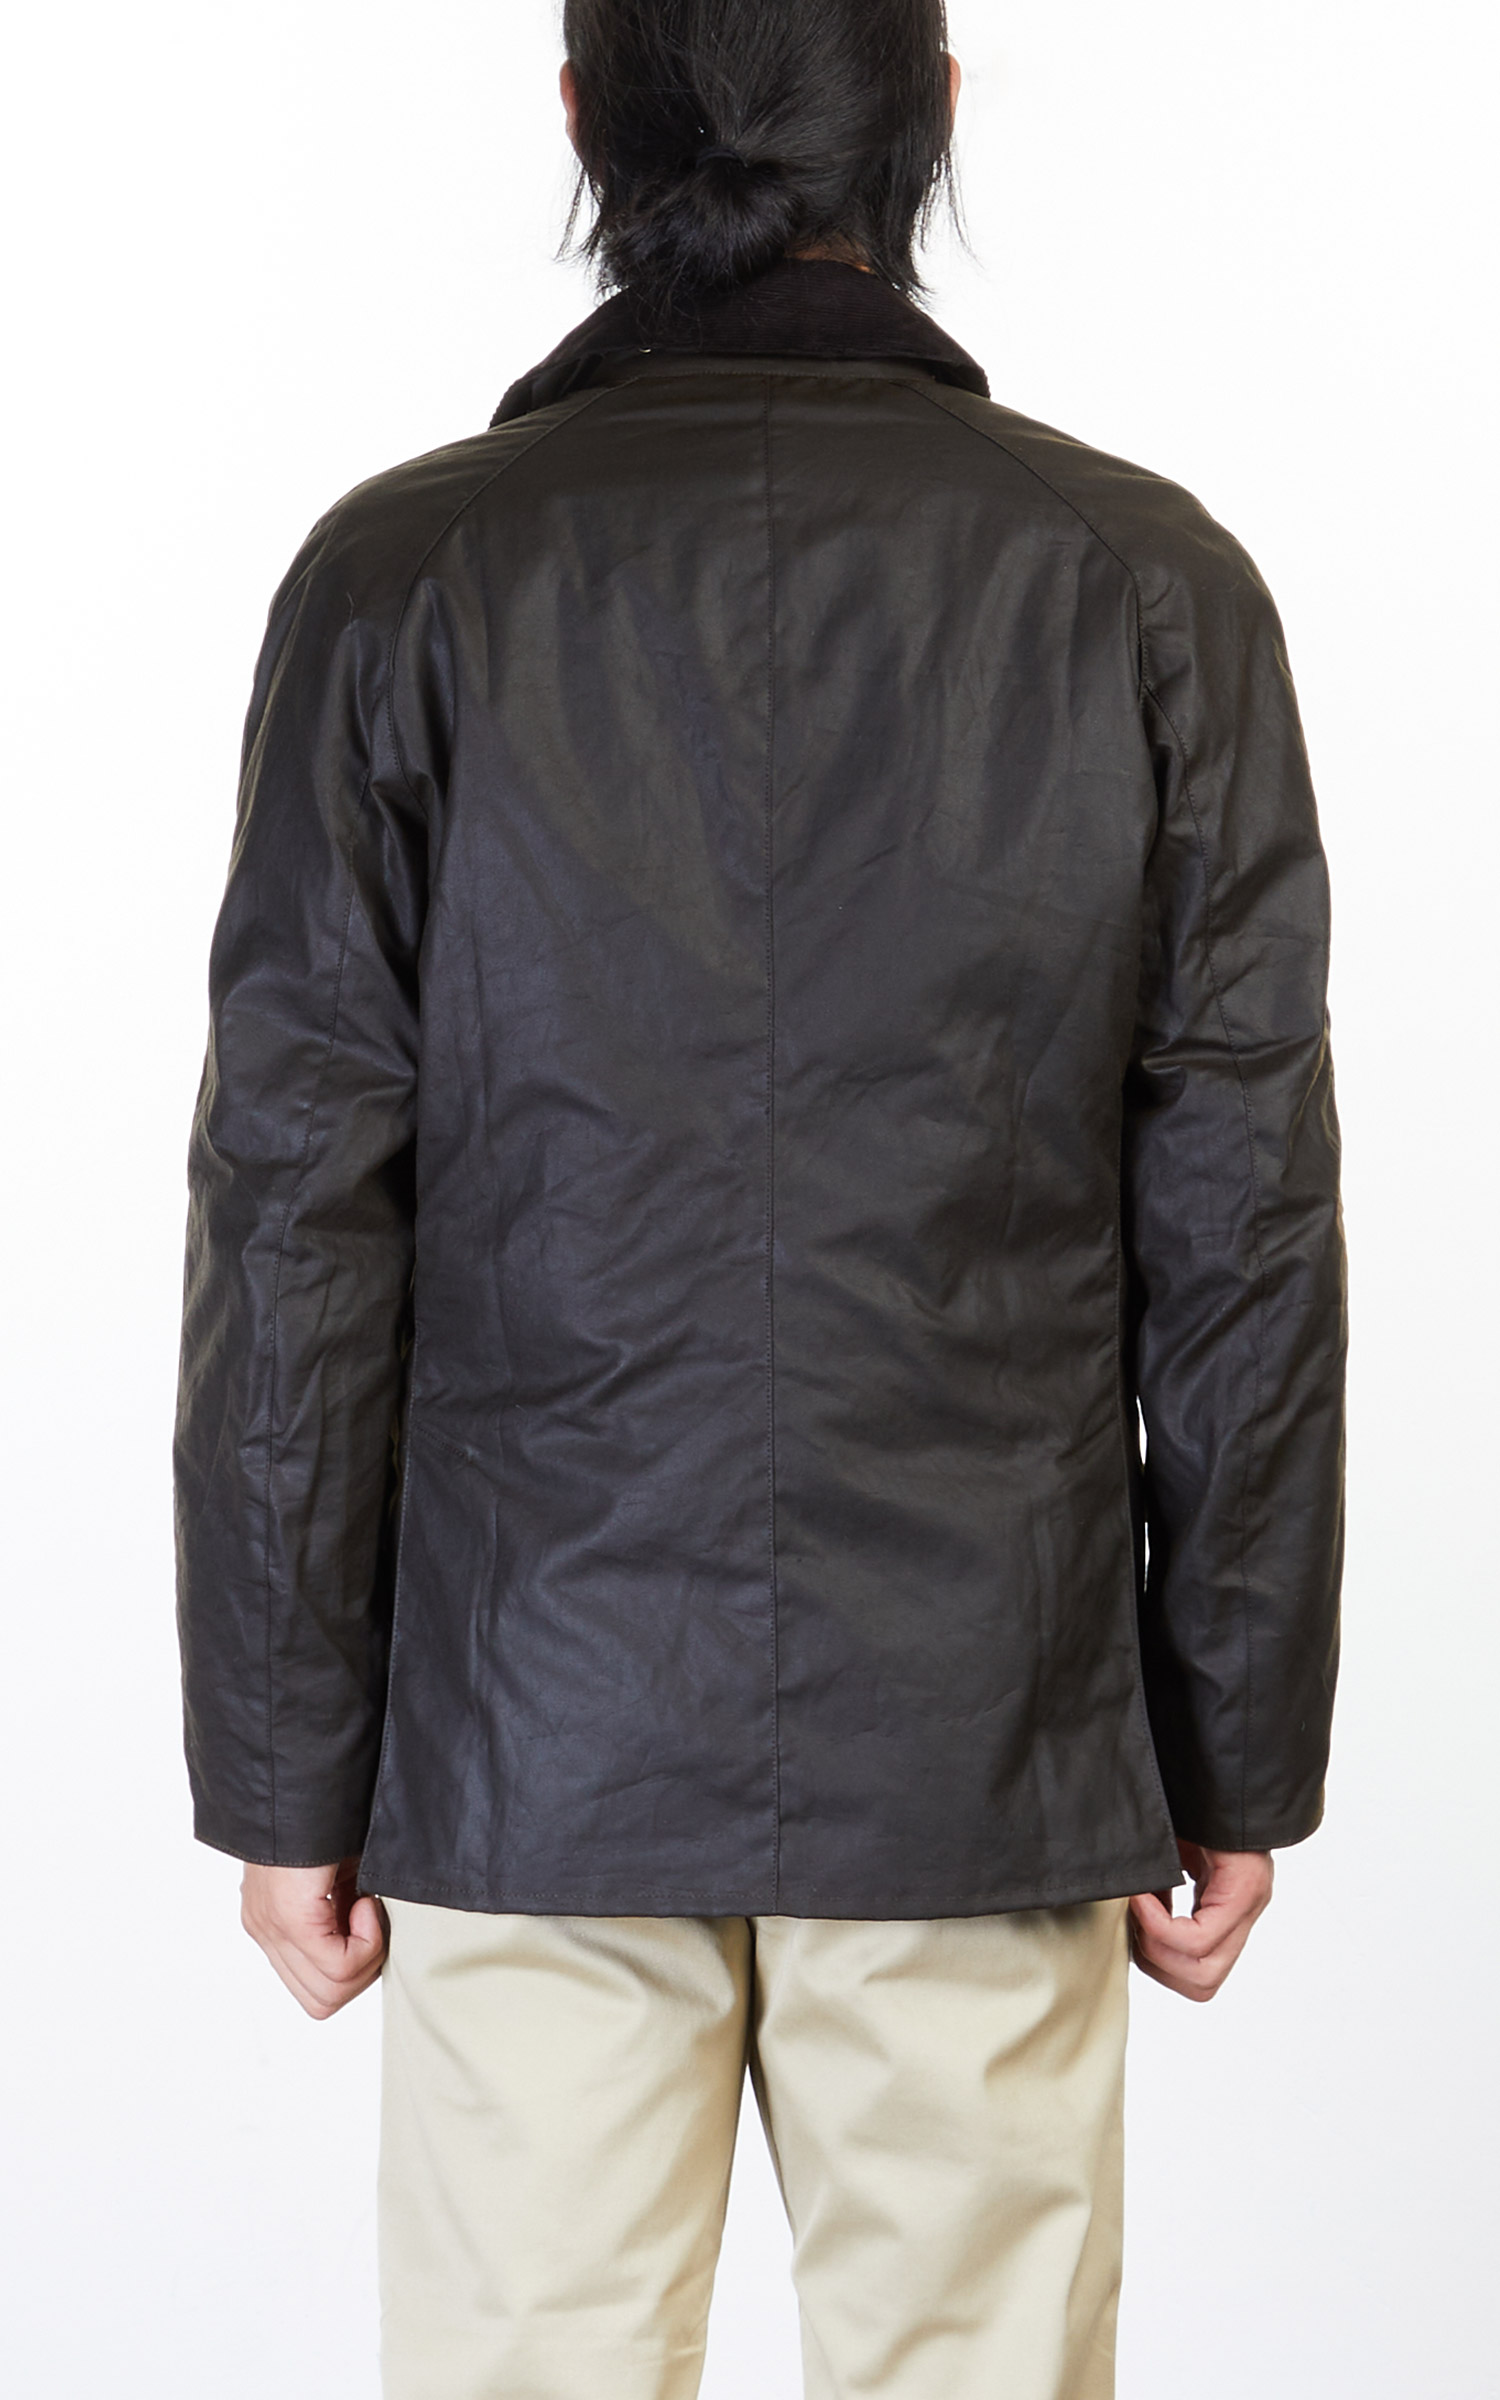 Barbour Mwx0339ol71 Incredible Prices, 47% OFF | prep.openr.fr